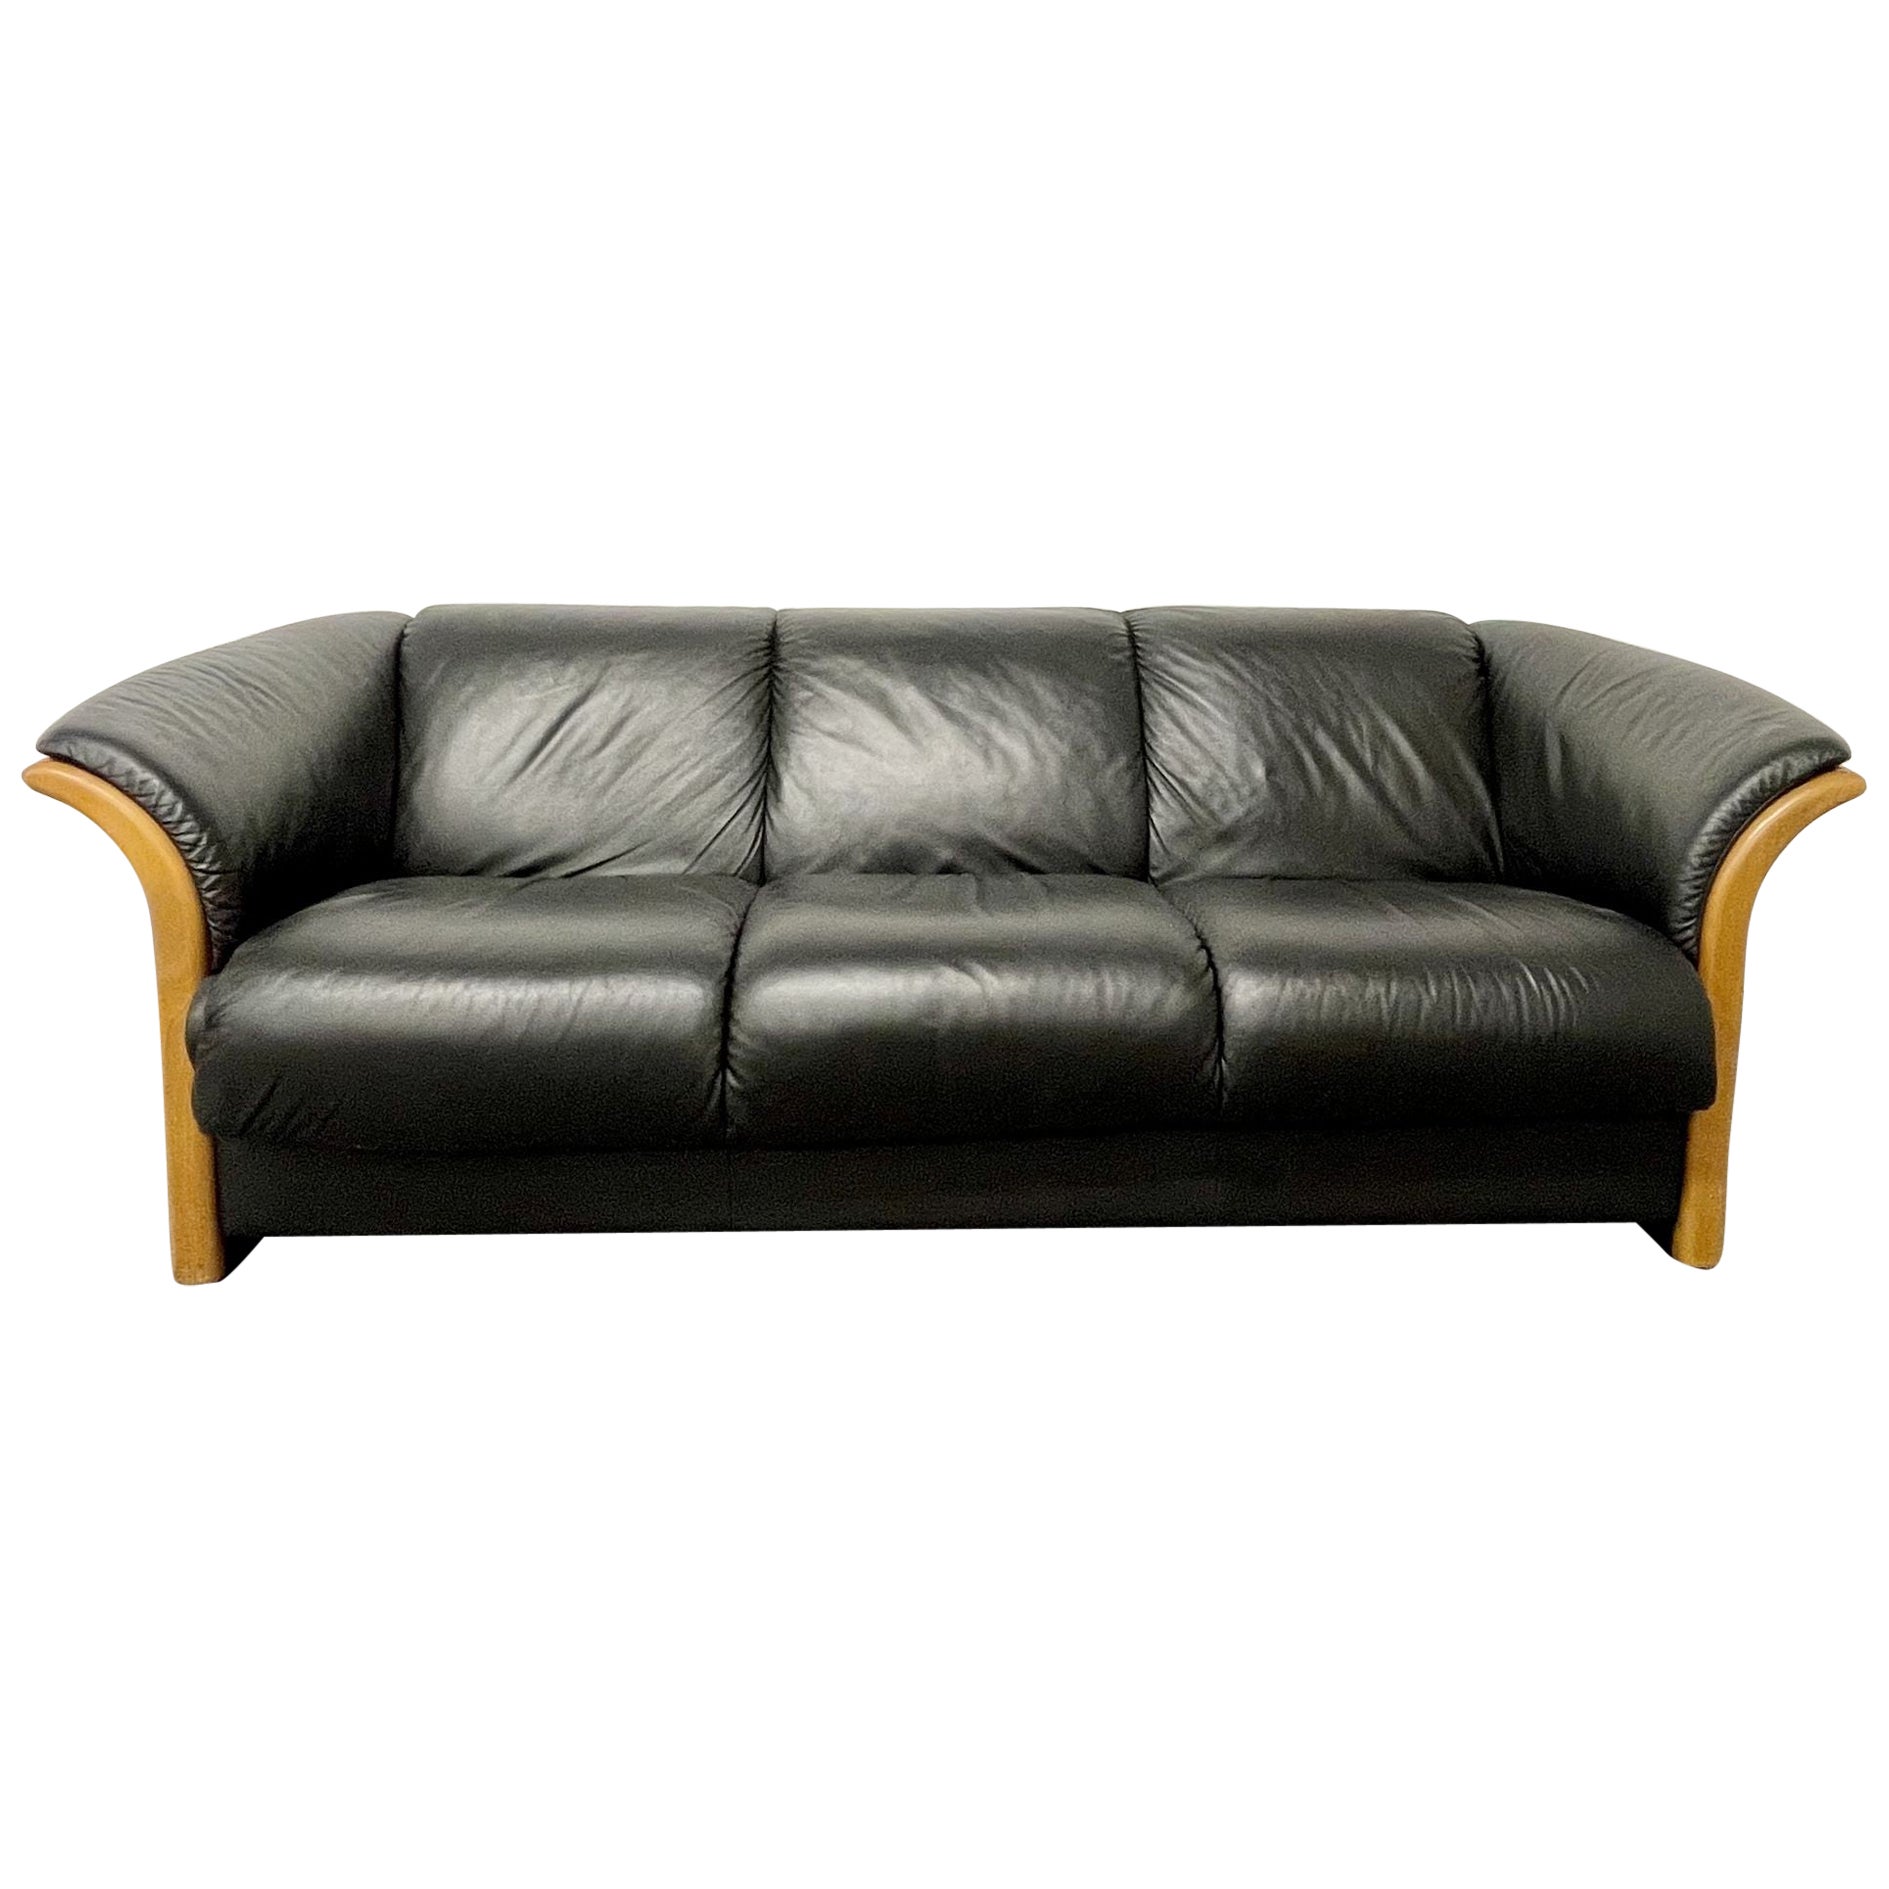 Mid Century Modern Sofa, Couch, Wood Trim, Black Leather For Sale